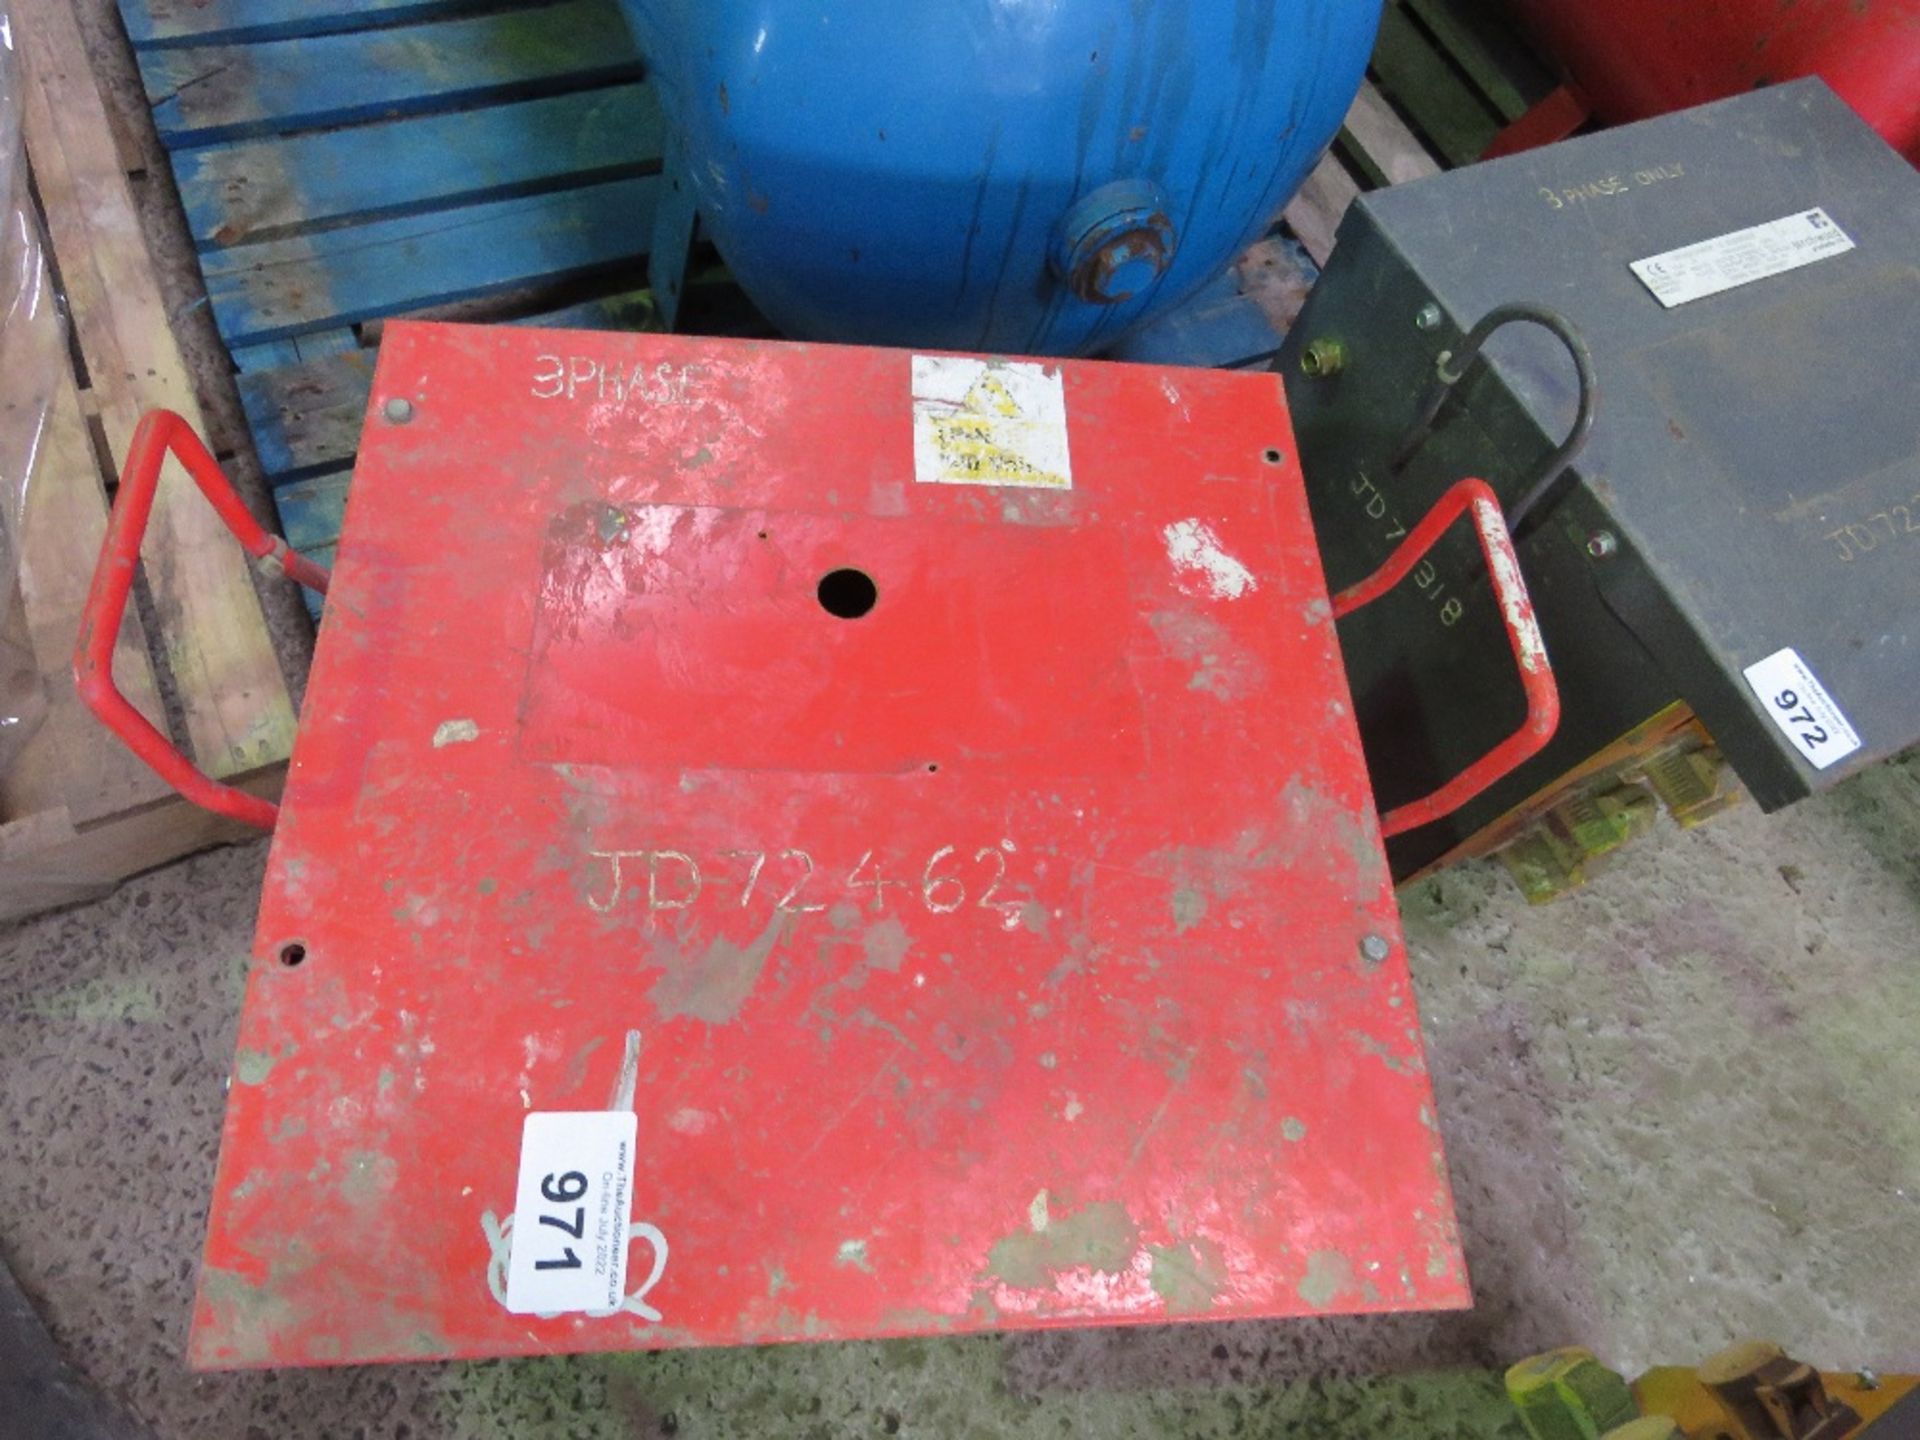 LARGE OUTPUT SITE TRANSFORMER. DIRECT FROM A LOCAL GROUNDWORKS COMPANY AS PART OF THEIR RESTRUCTU